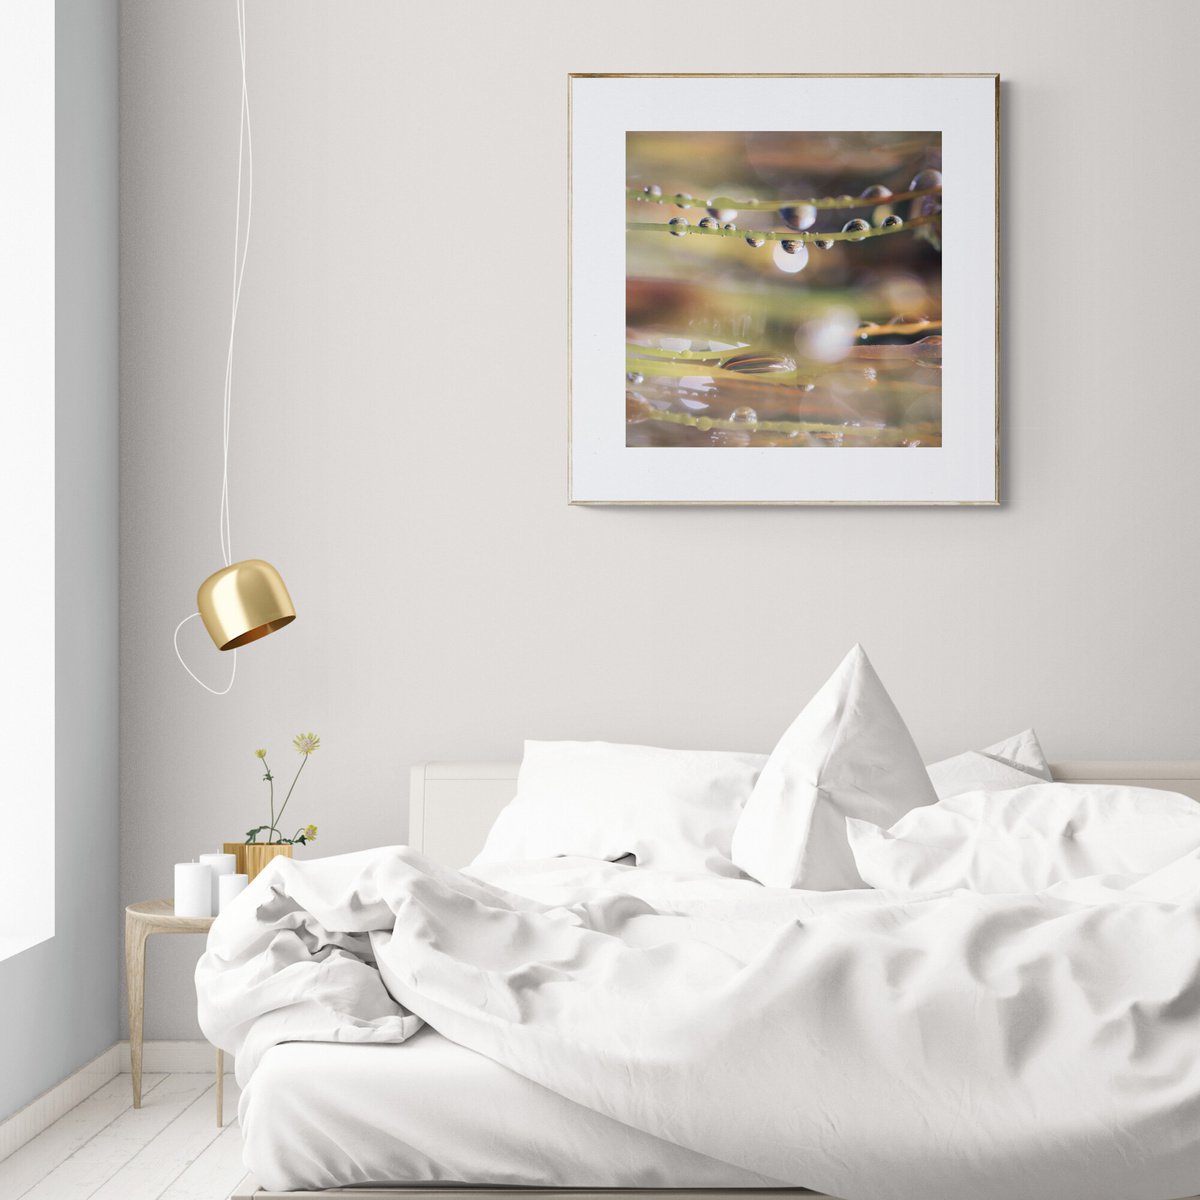 Mossy dreams of the forest - limited edition giclee print of art photo, warm colors by Inna Etuvgi